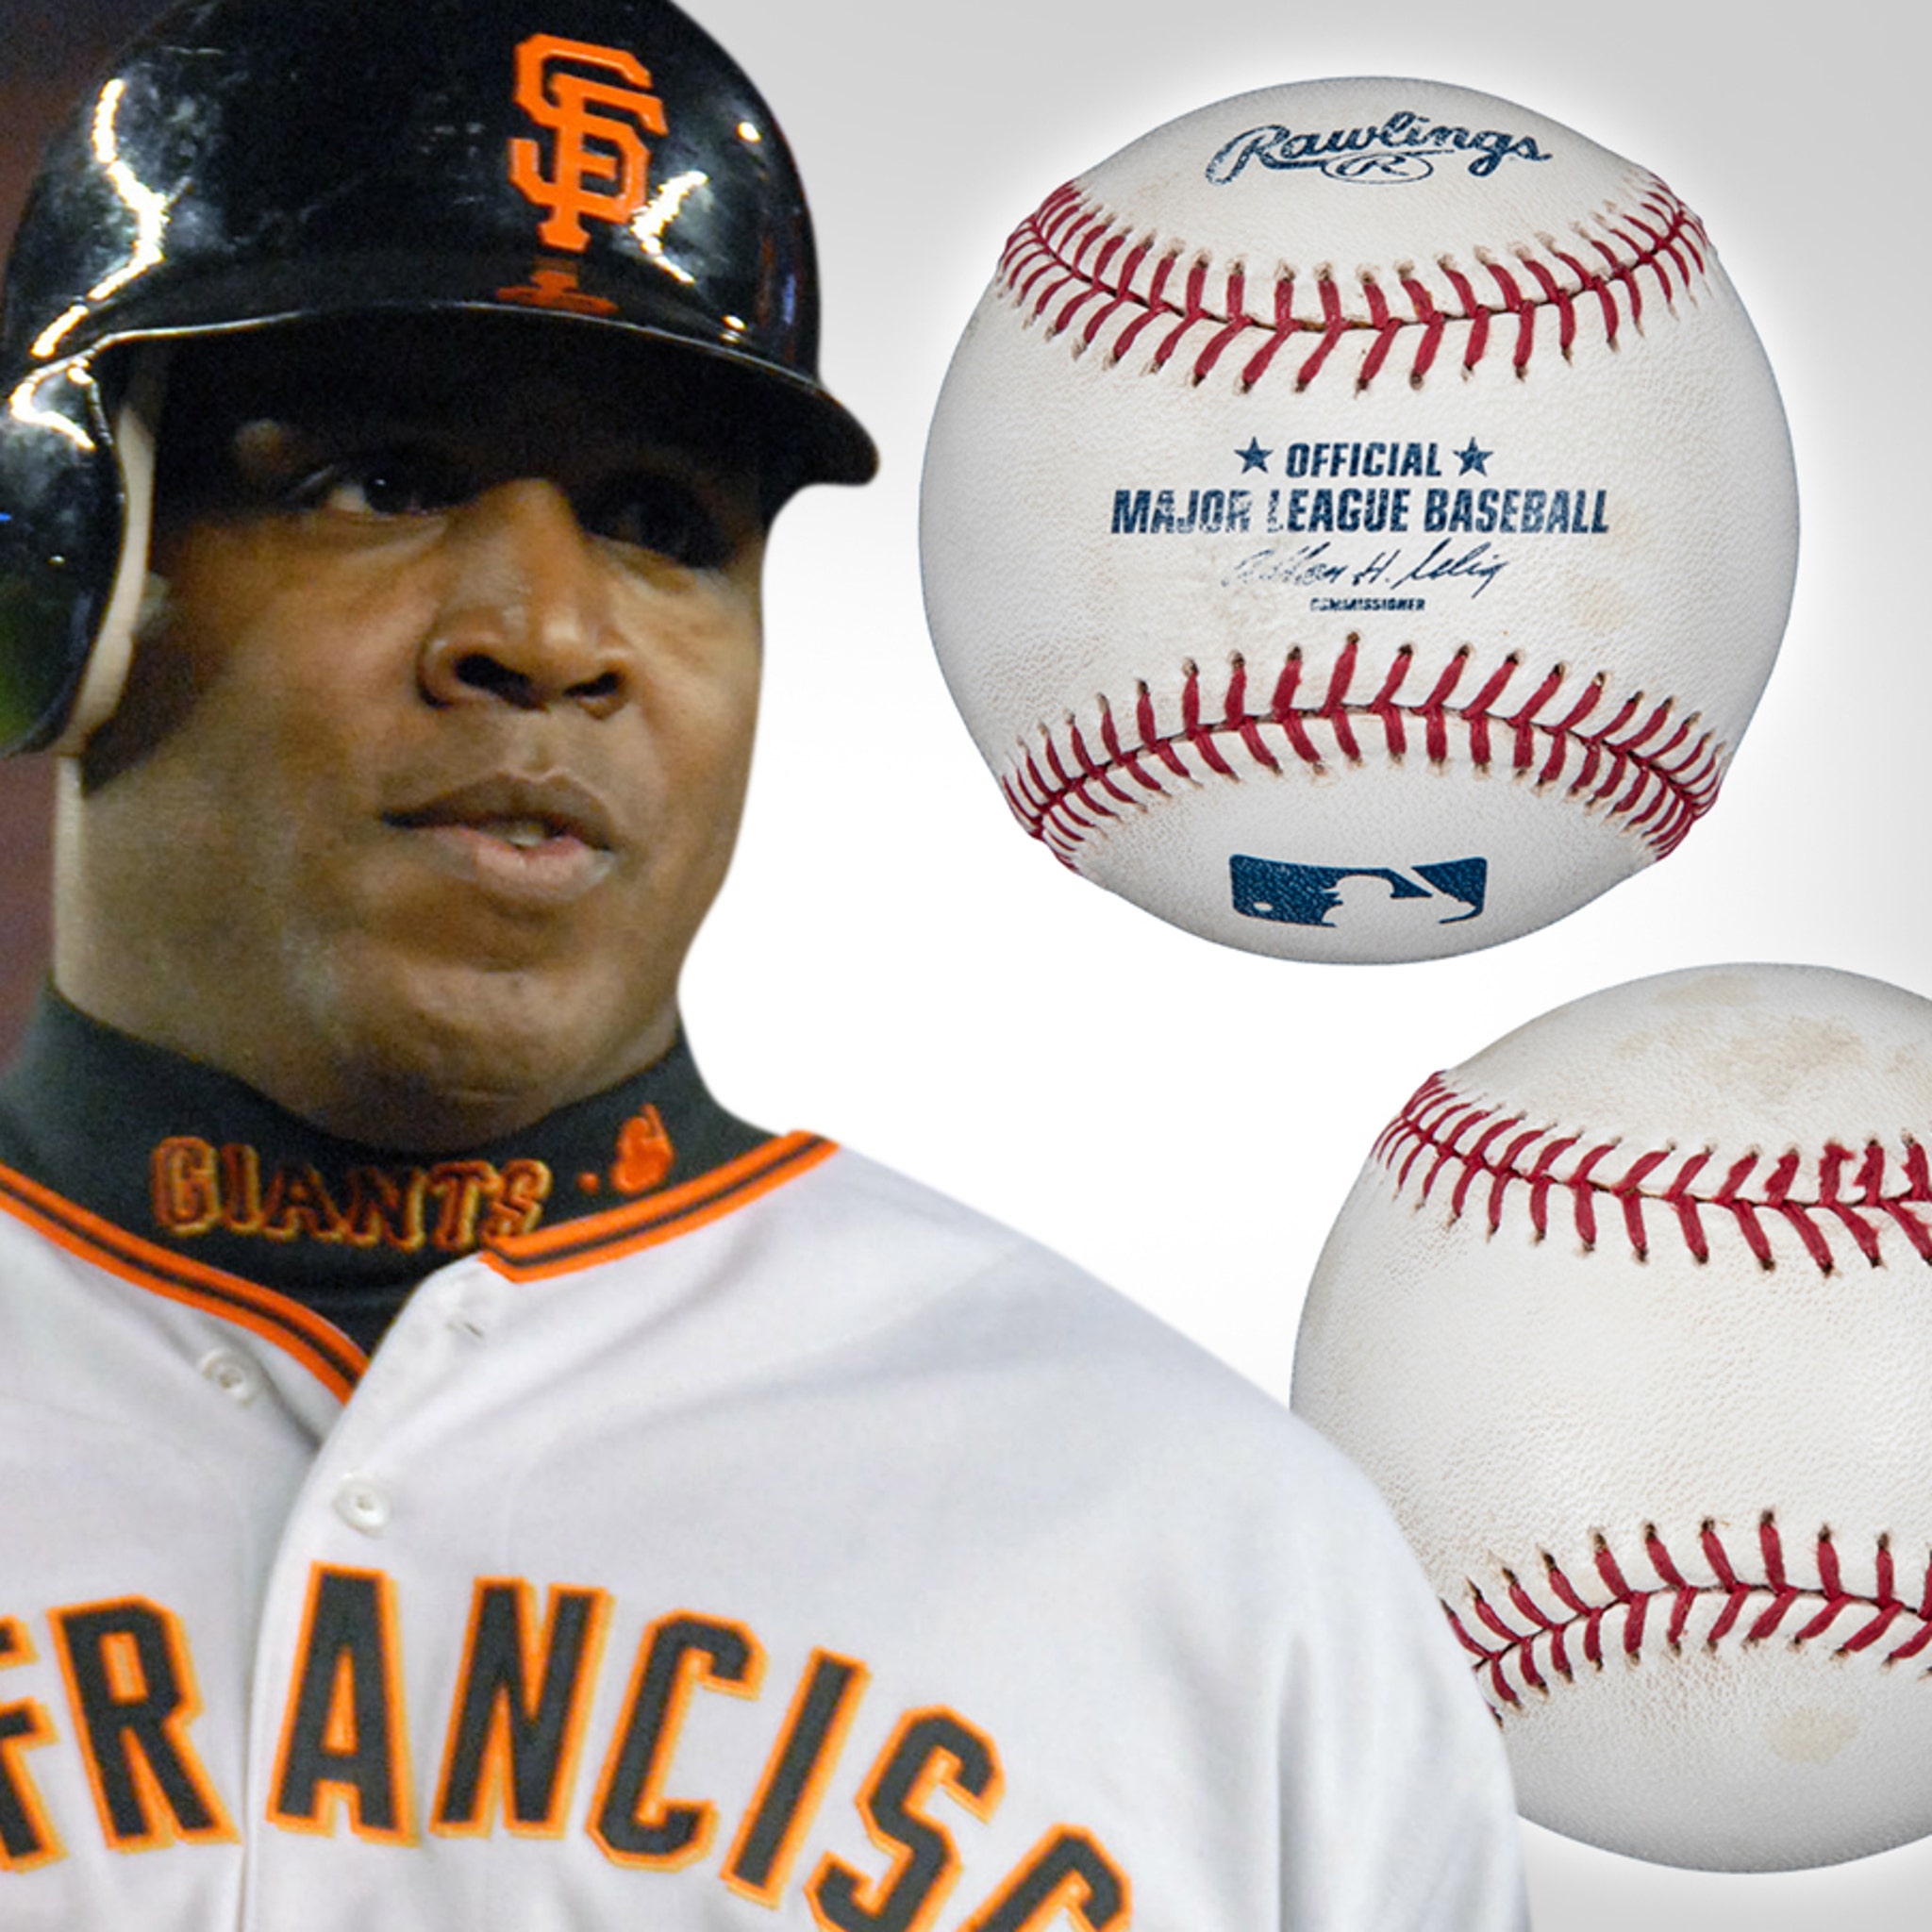 Barry Bonds' final hit in the Major Leagues 